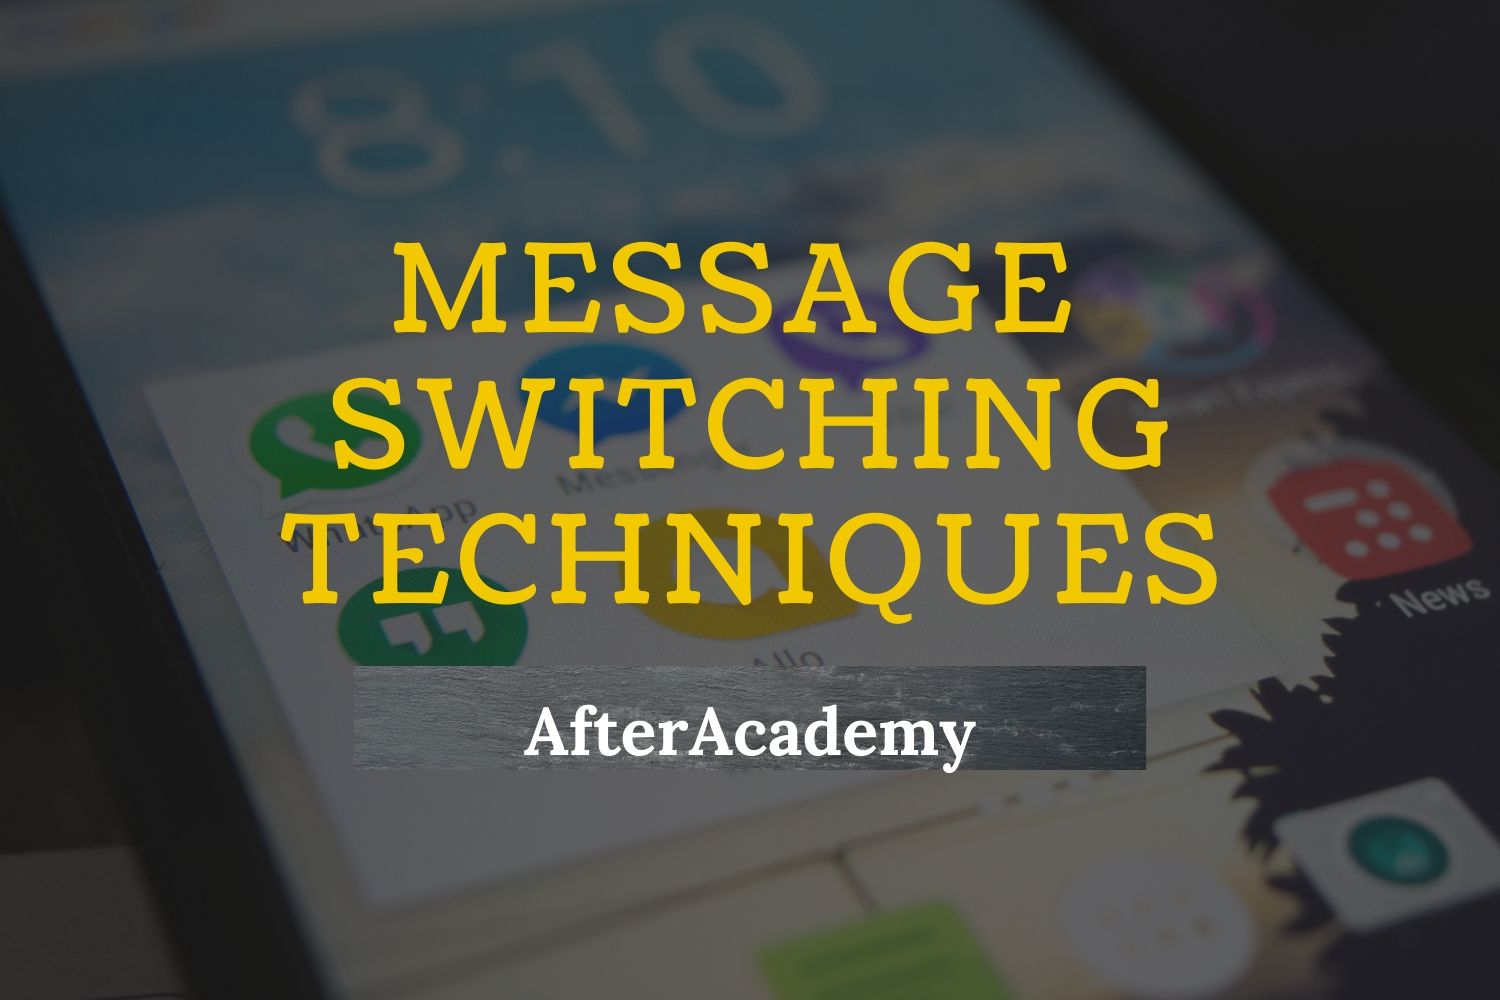 What are various Message switching techniques?